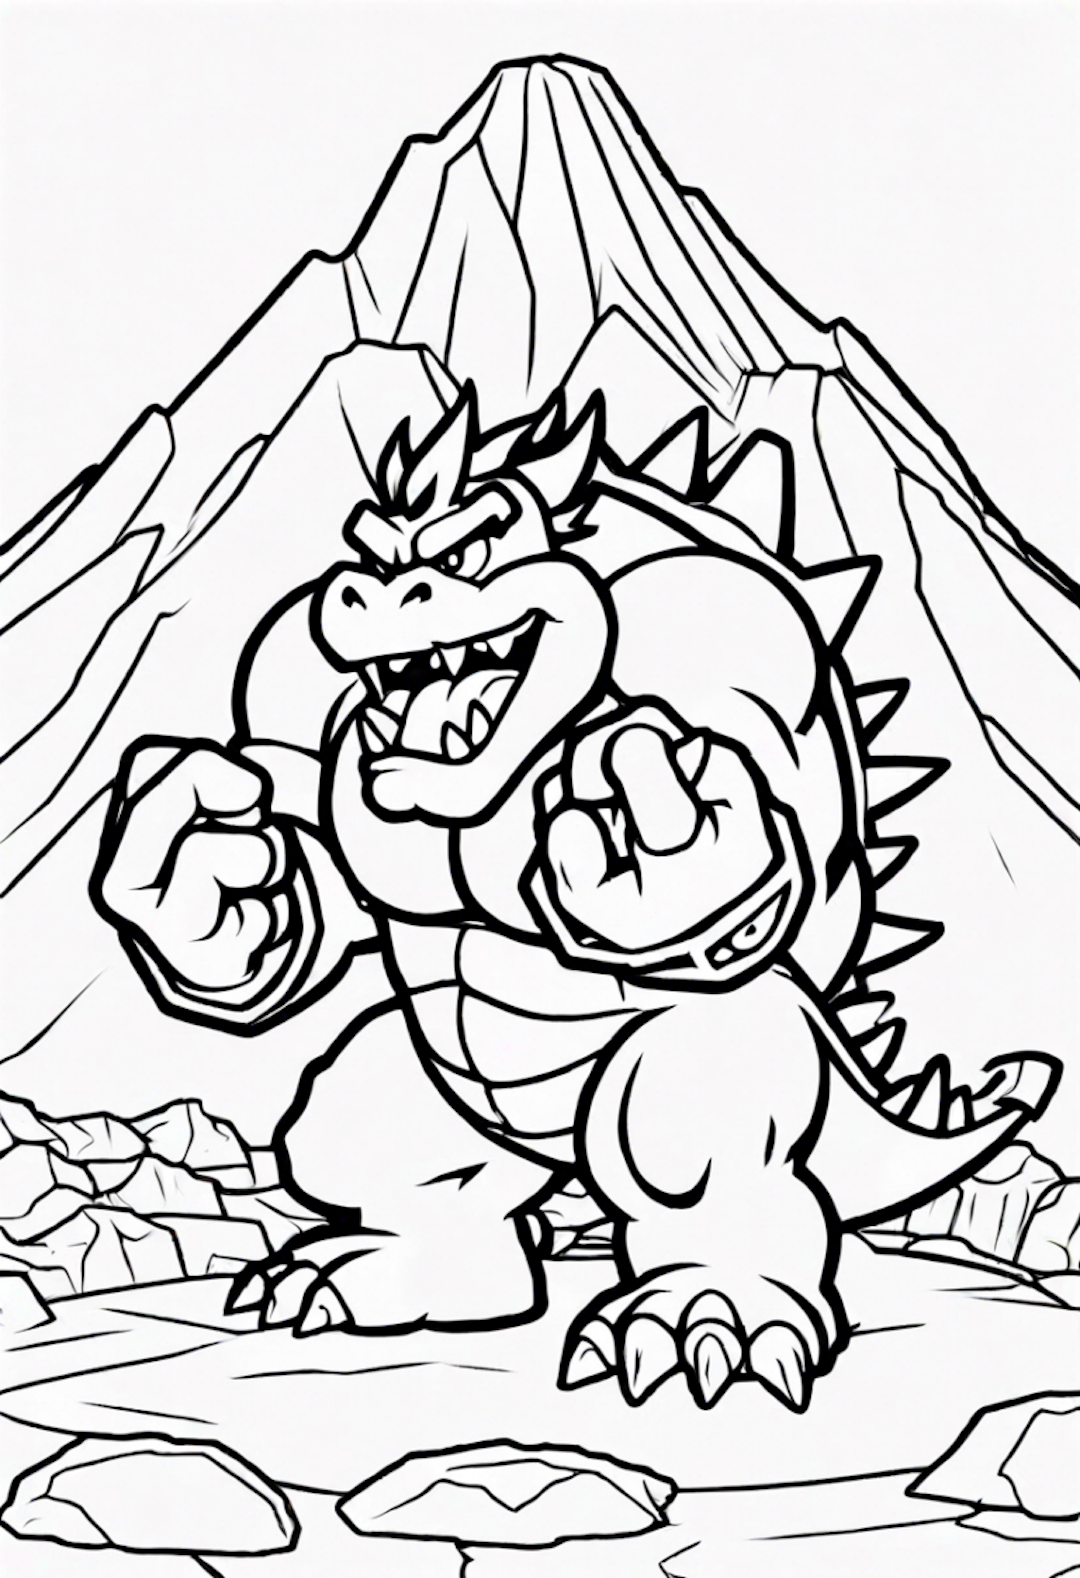 Bowser At The Volcano Lair coloring pages